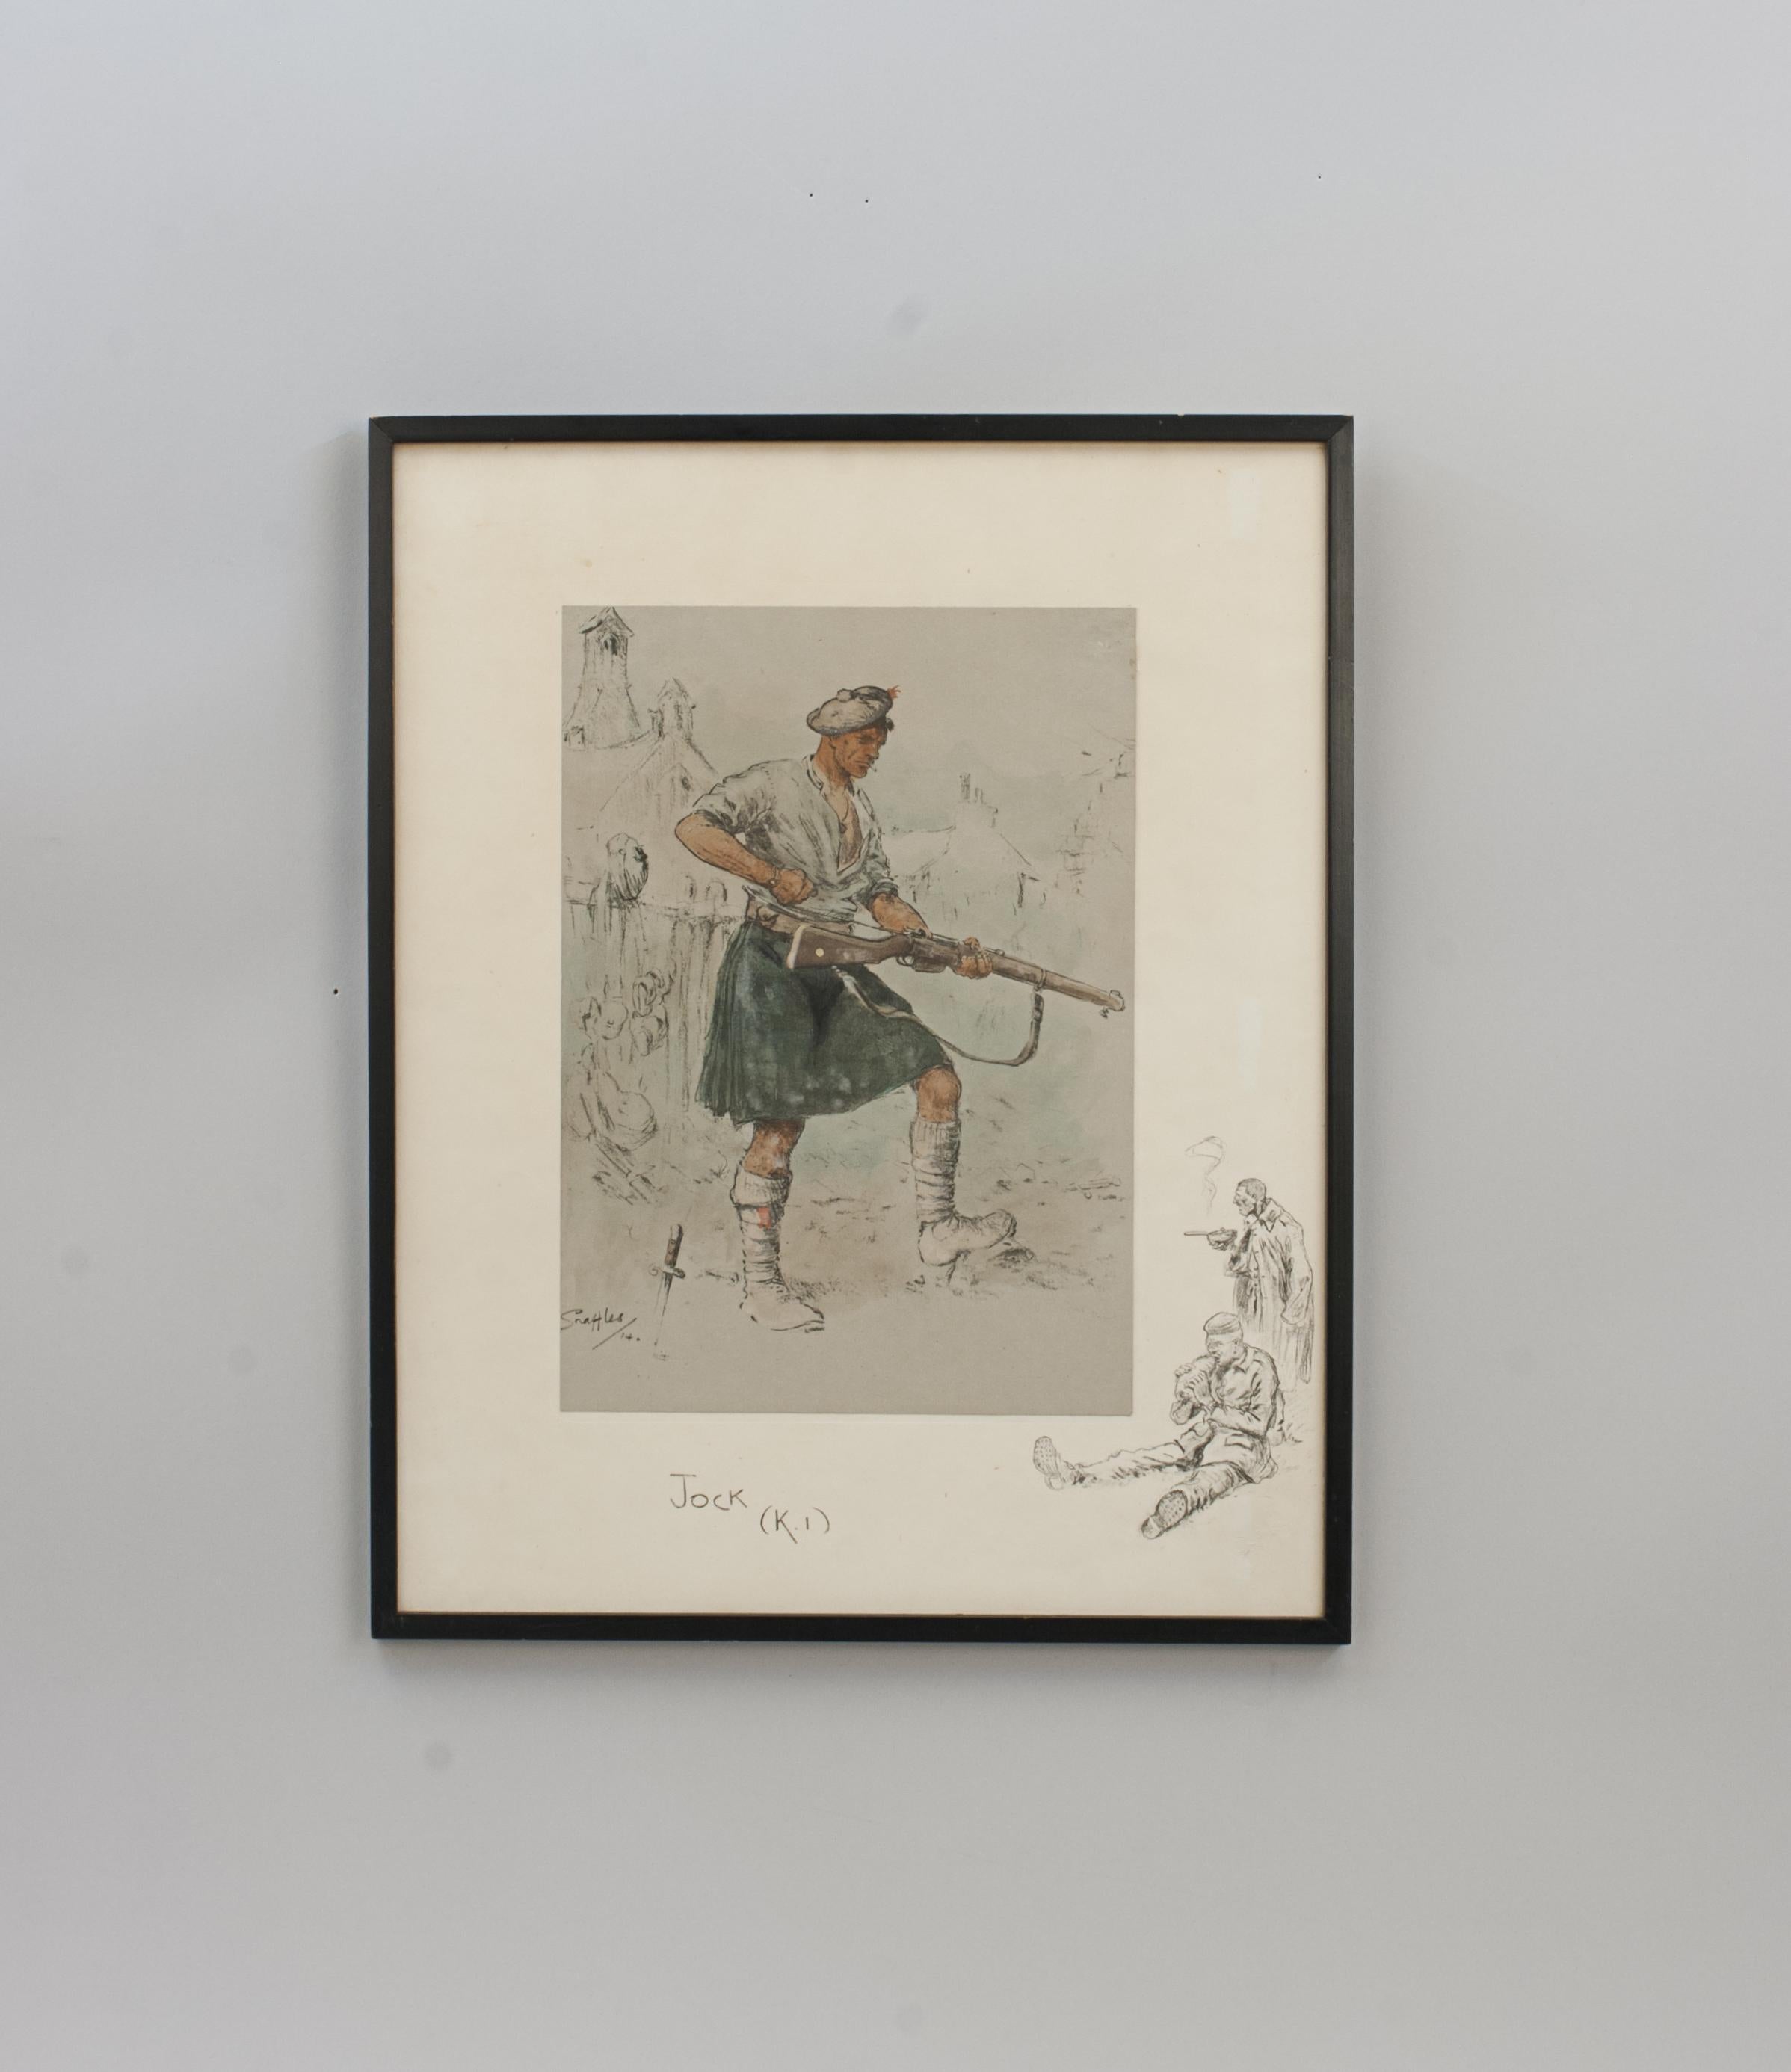 Vintage Snaffles 'Jock' (K.I.) WWI Military Print.
A hand coloured Snaffles lithograph entitled Jock (K.I). The picture shows a Kilted Infantryman standing amongst ruins, his bayonet in the ground, cleaning his riffle. In the right hand margin is a